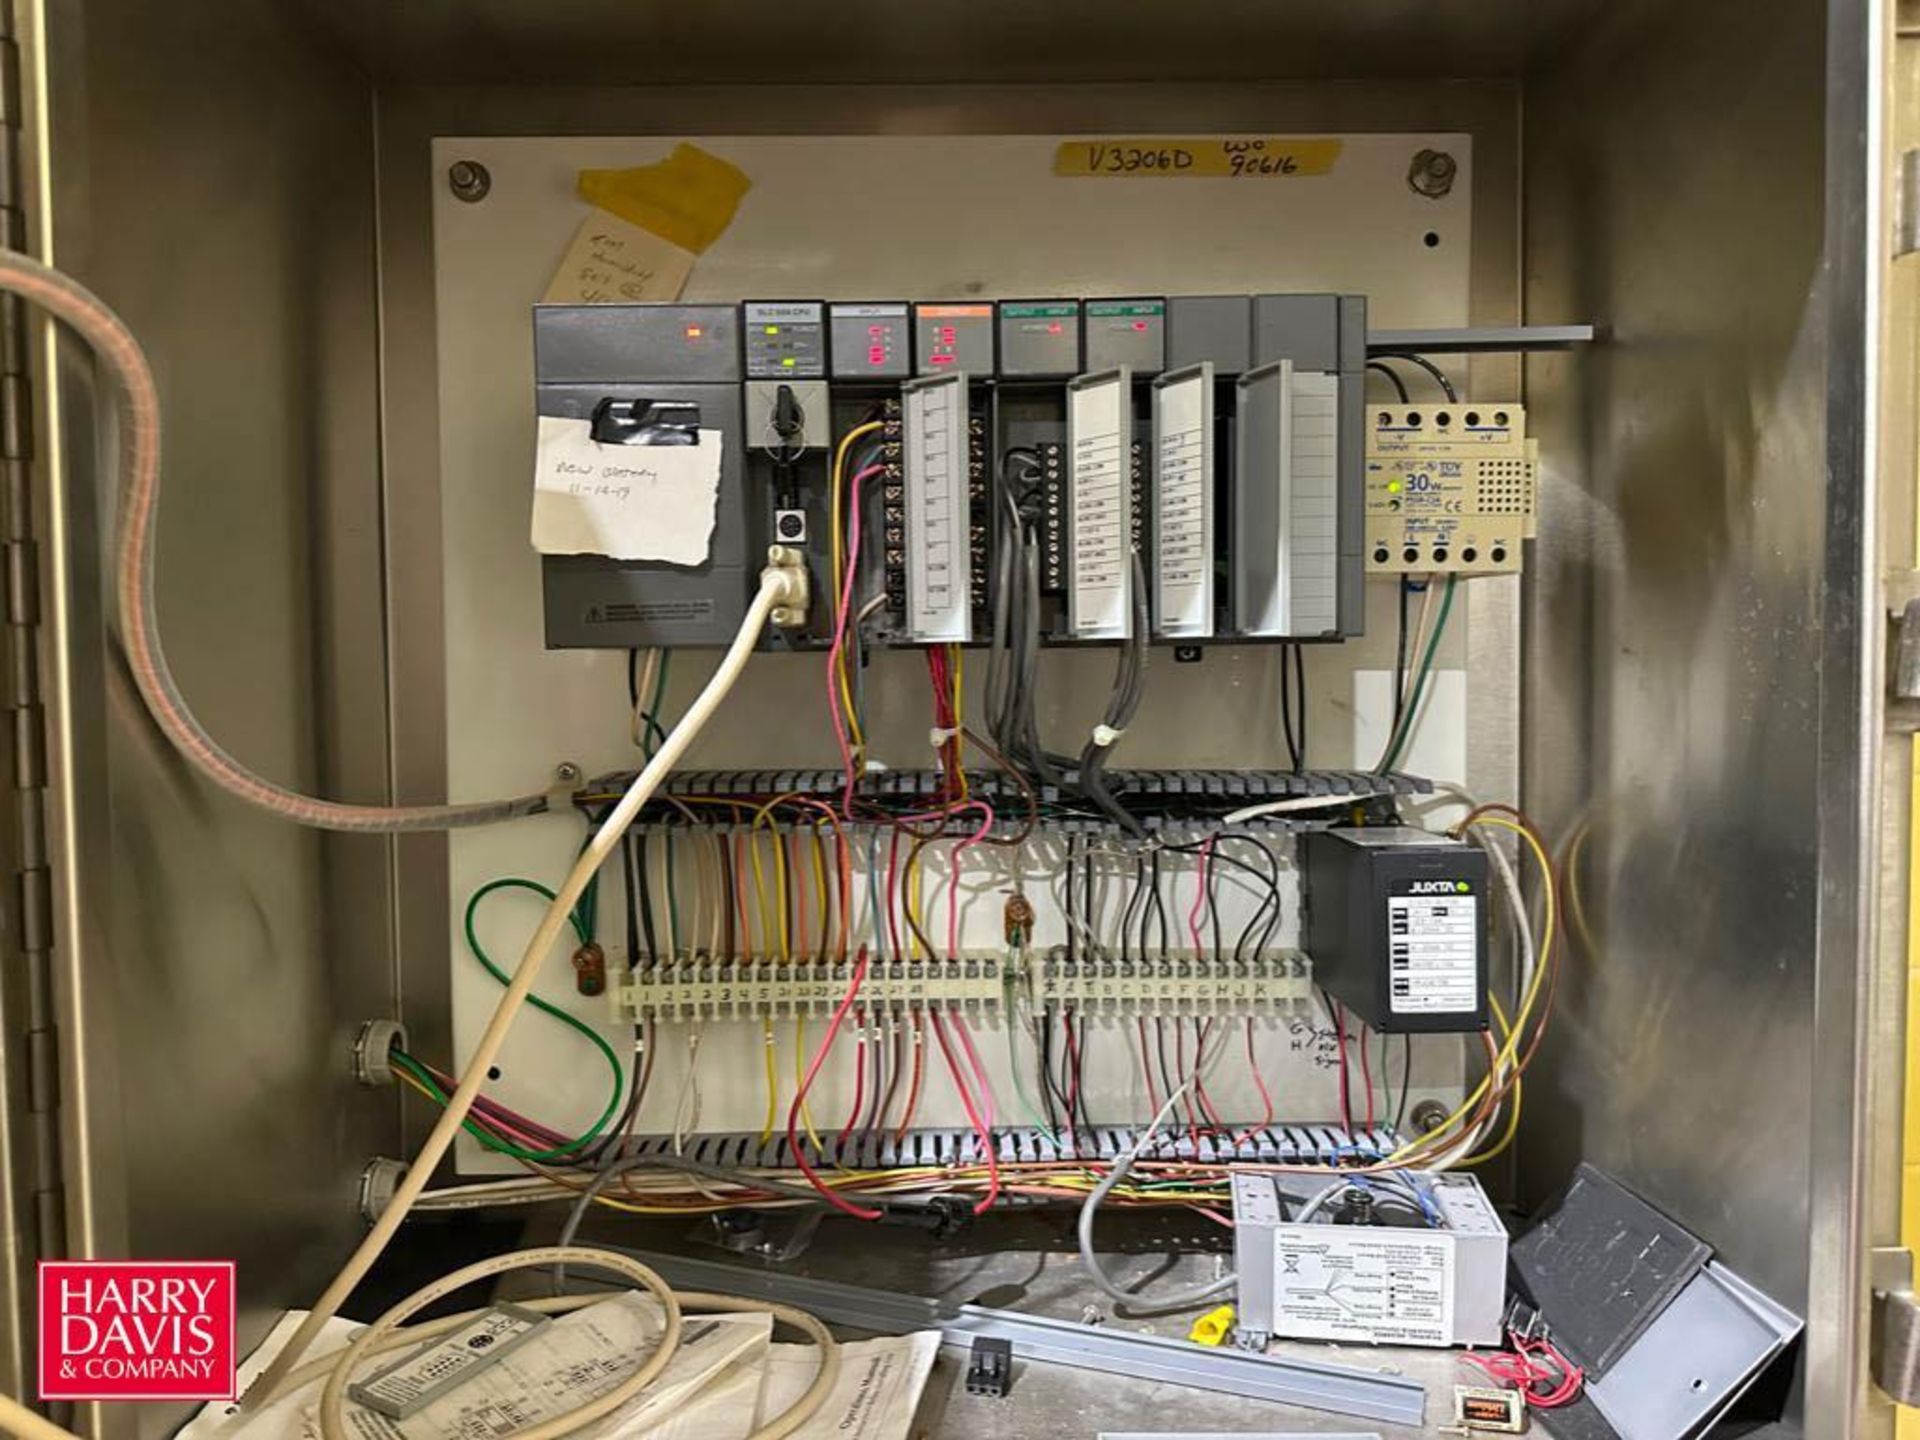 Allen-Bradley SLC 5/04 CPU with (4) I/Os, PanelView Plus 550 HMI and S/S Enclosure - Image 2 of 2